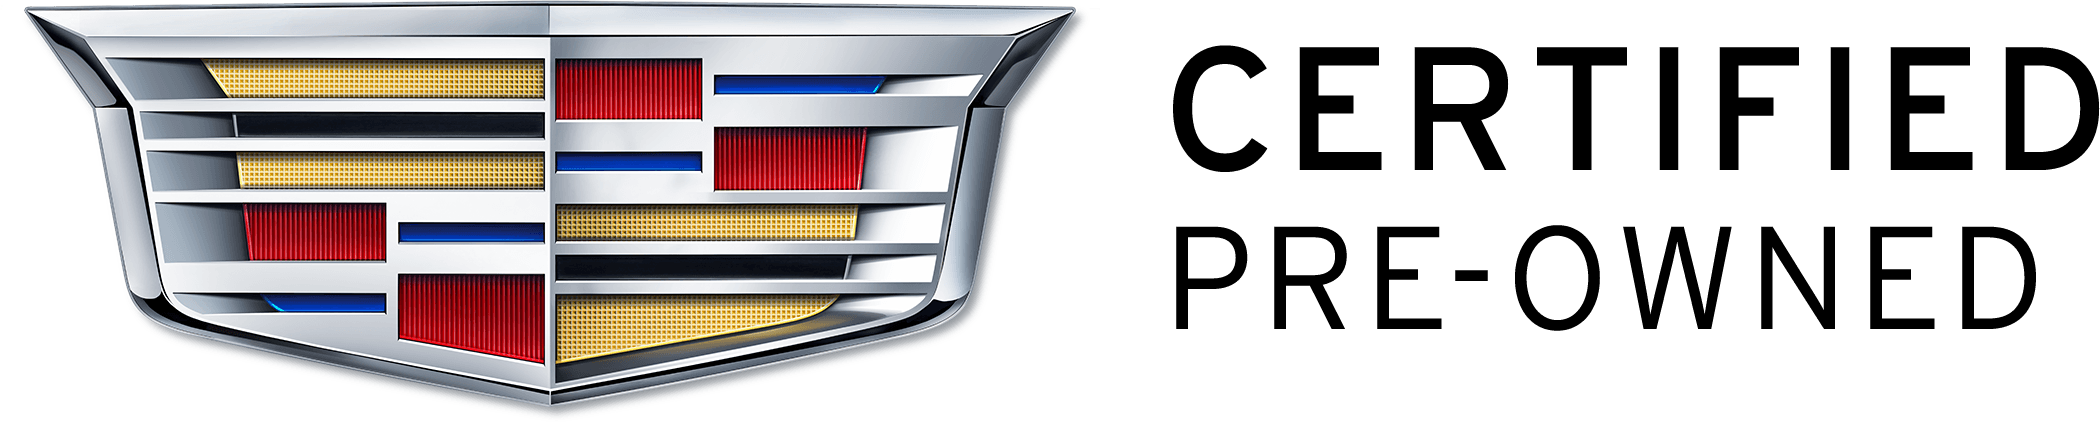 Certified Cadillac Logo - Cadillac Certified Pre Owned Vehicles. Used Cars. Hennessy